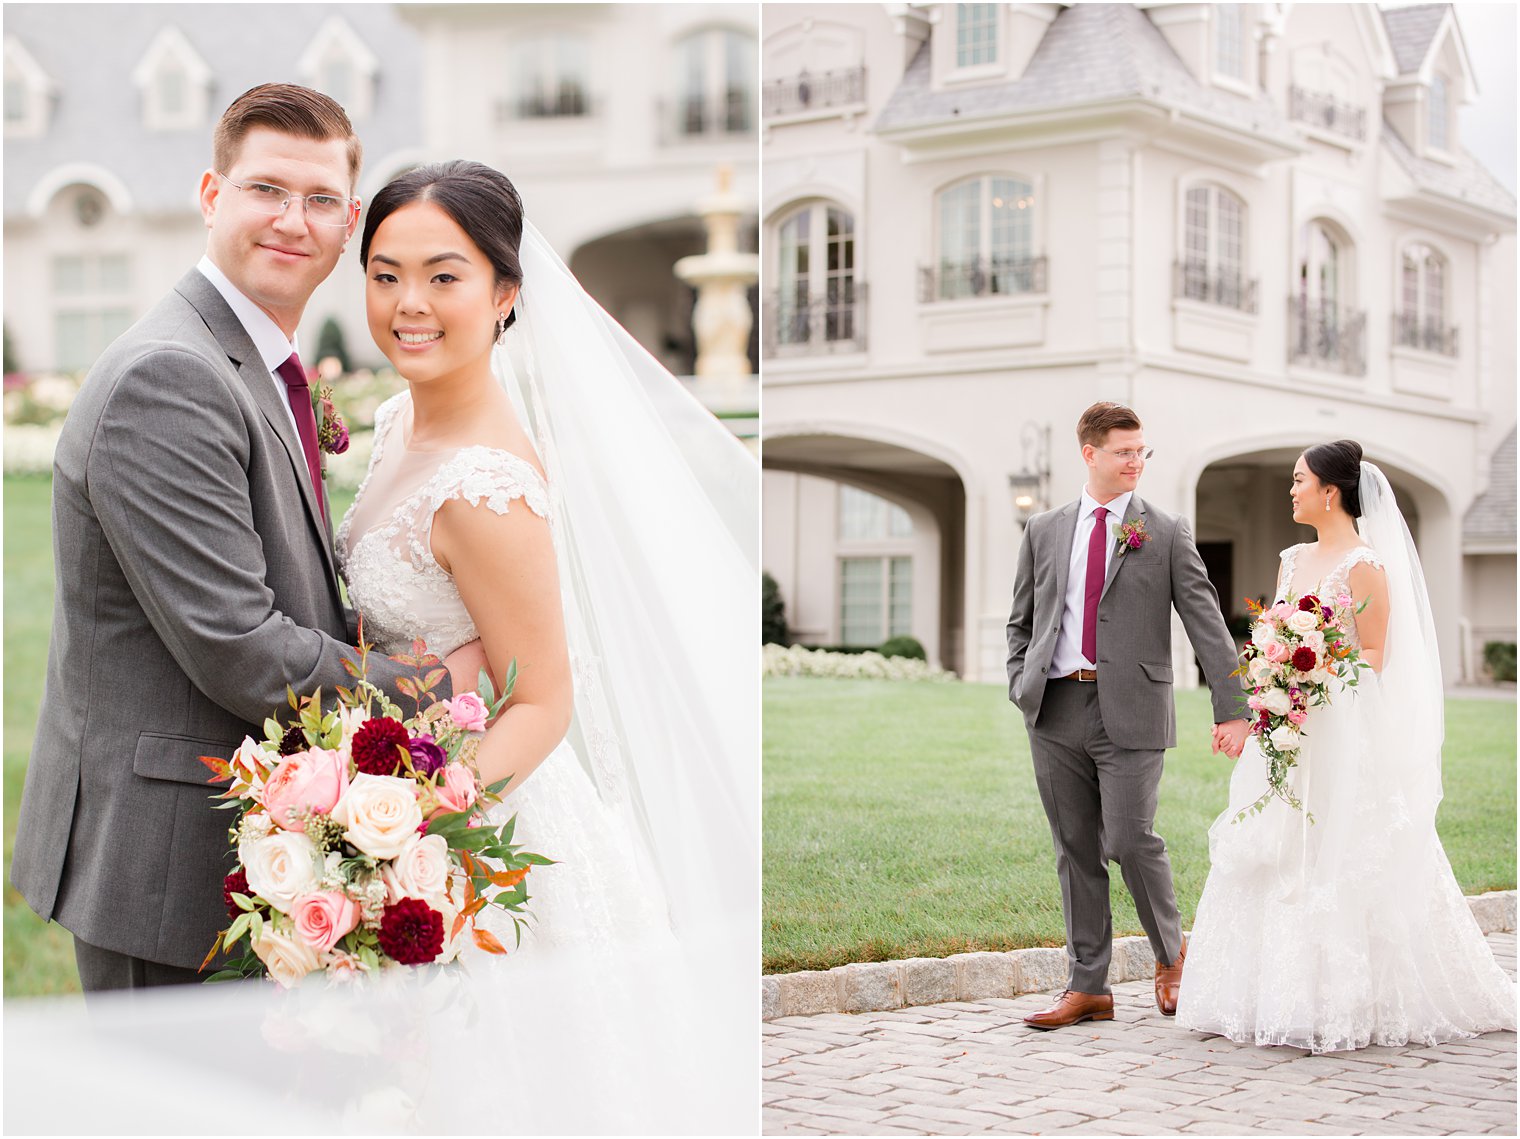 Bride and groom photos at Park Chateau Estate